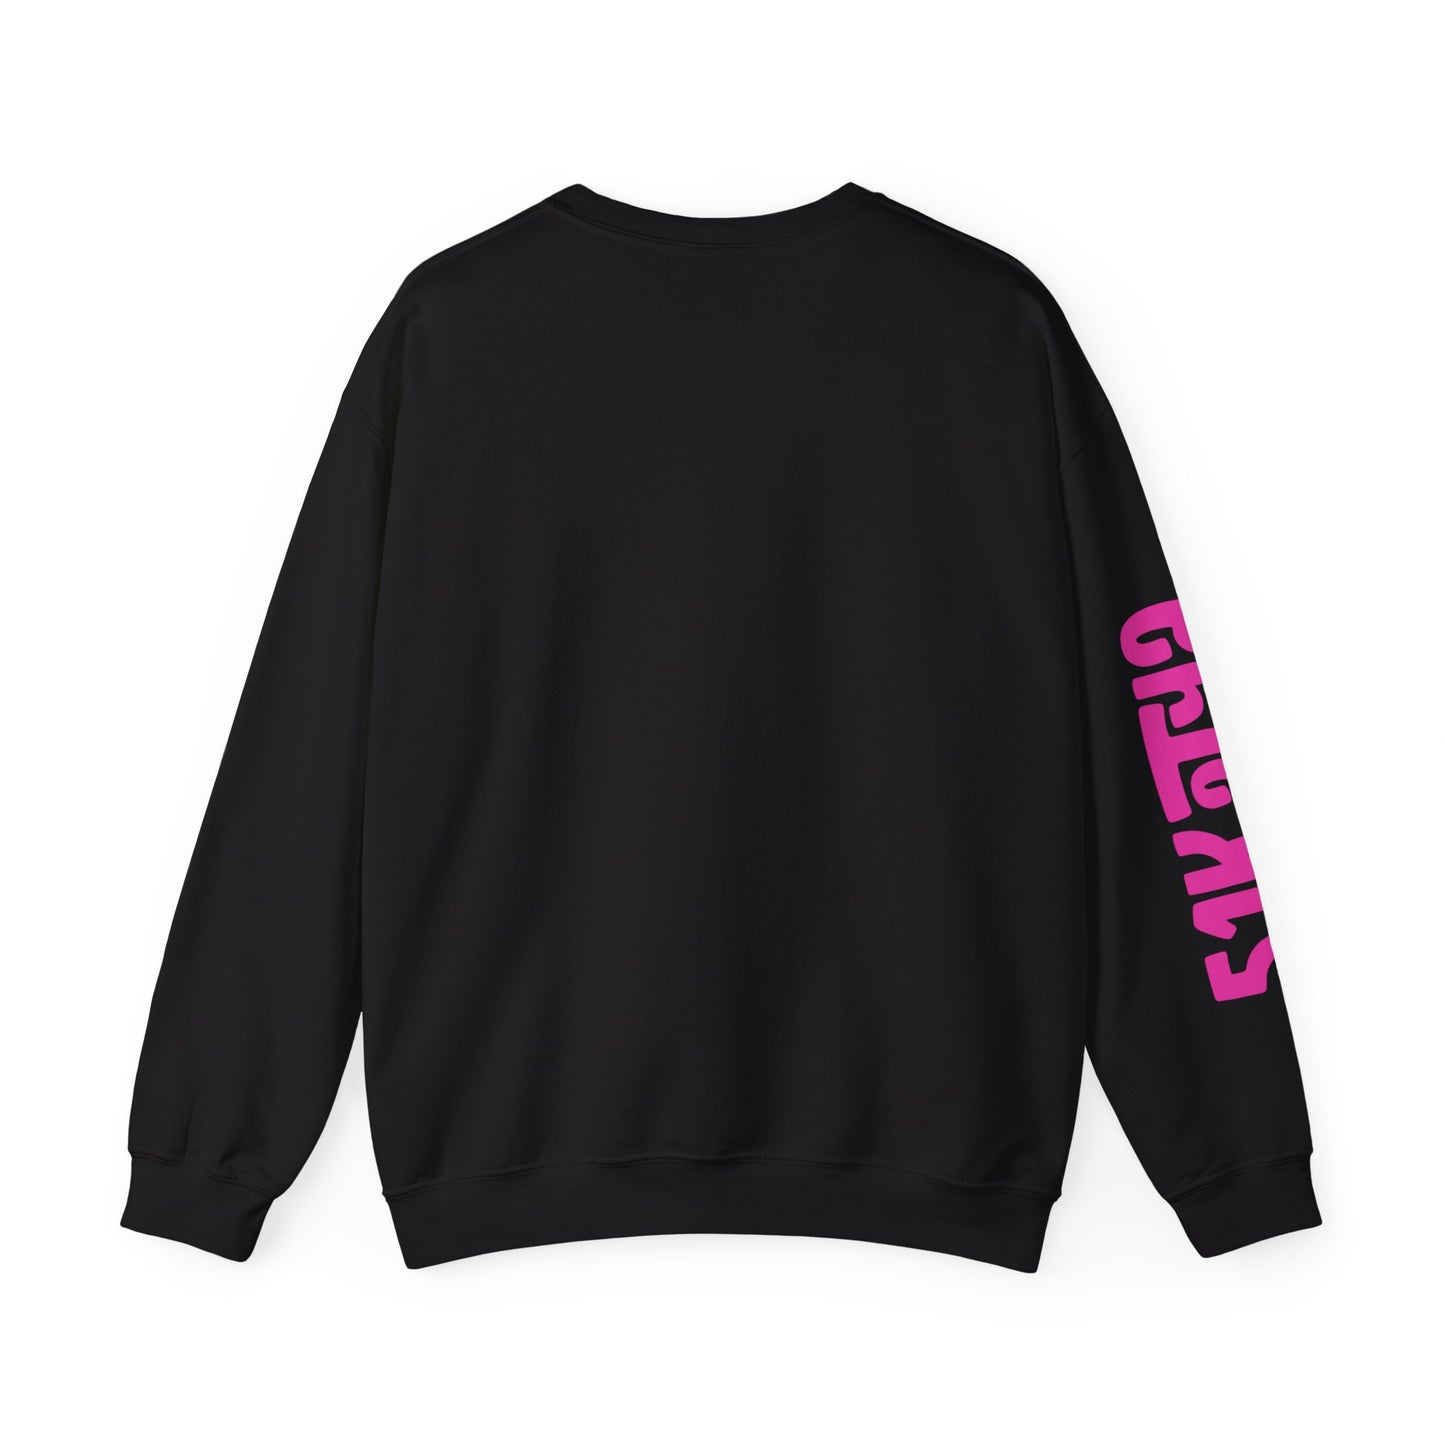 I love you the most in my heart Crewneck Sweatshirt